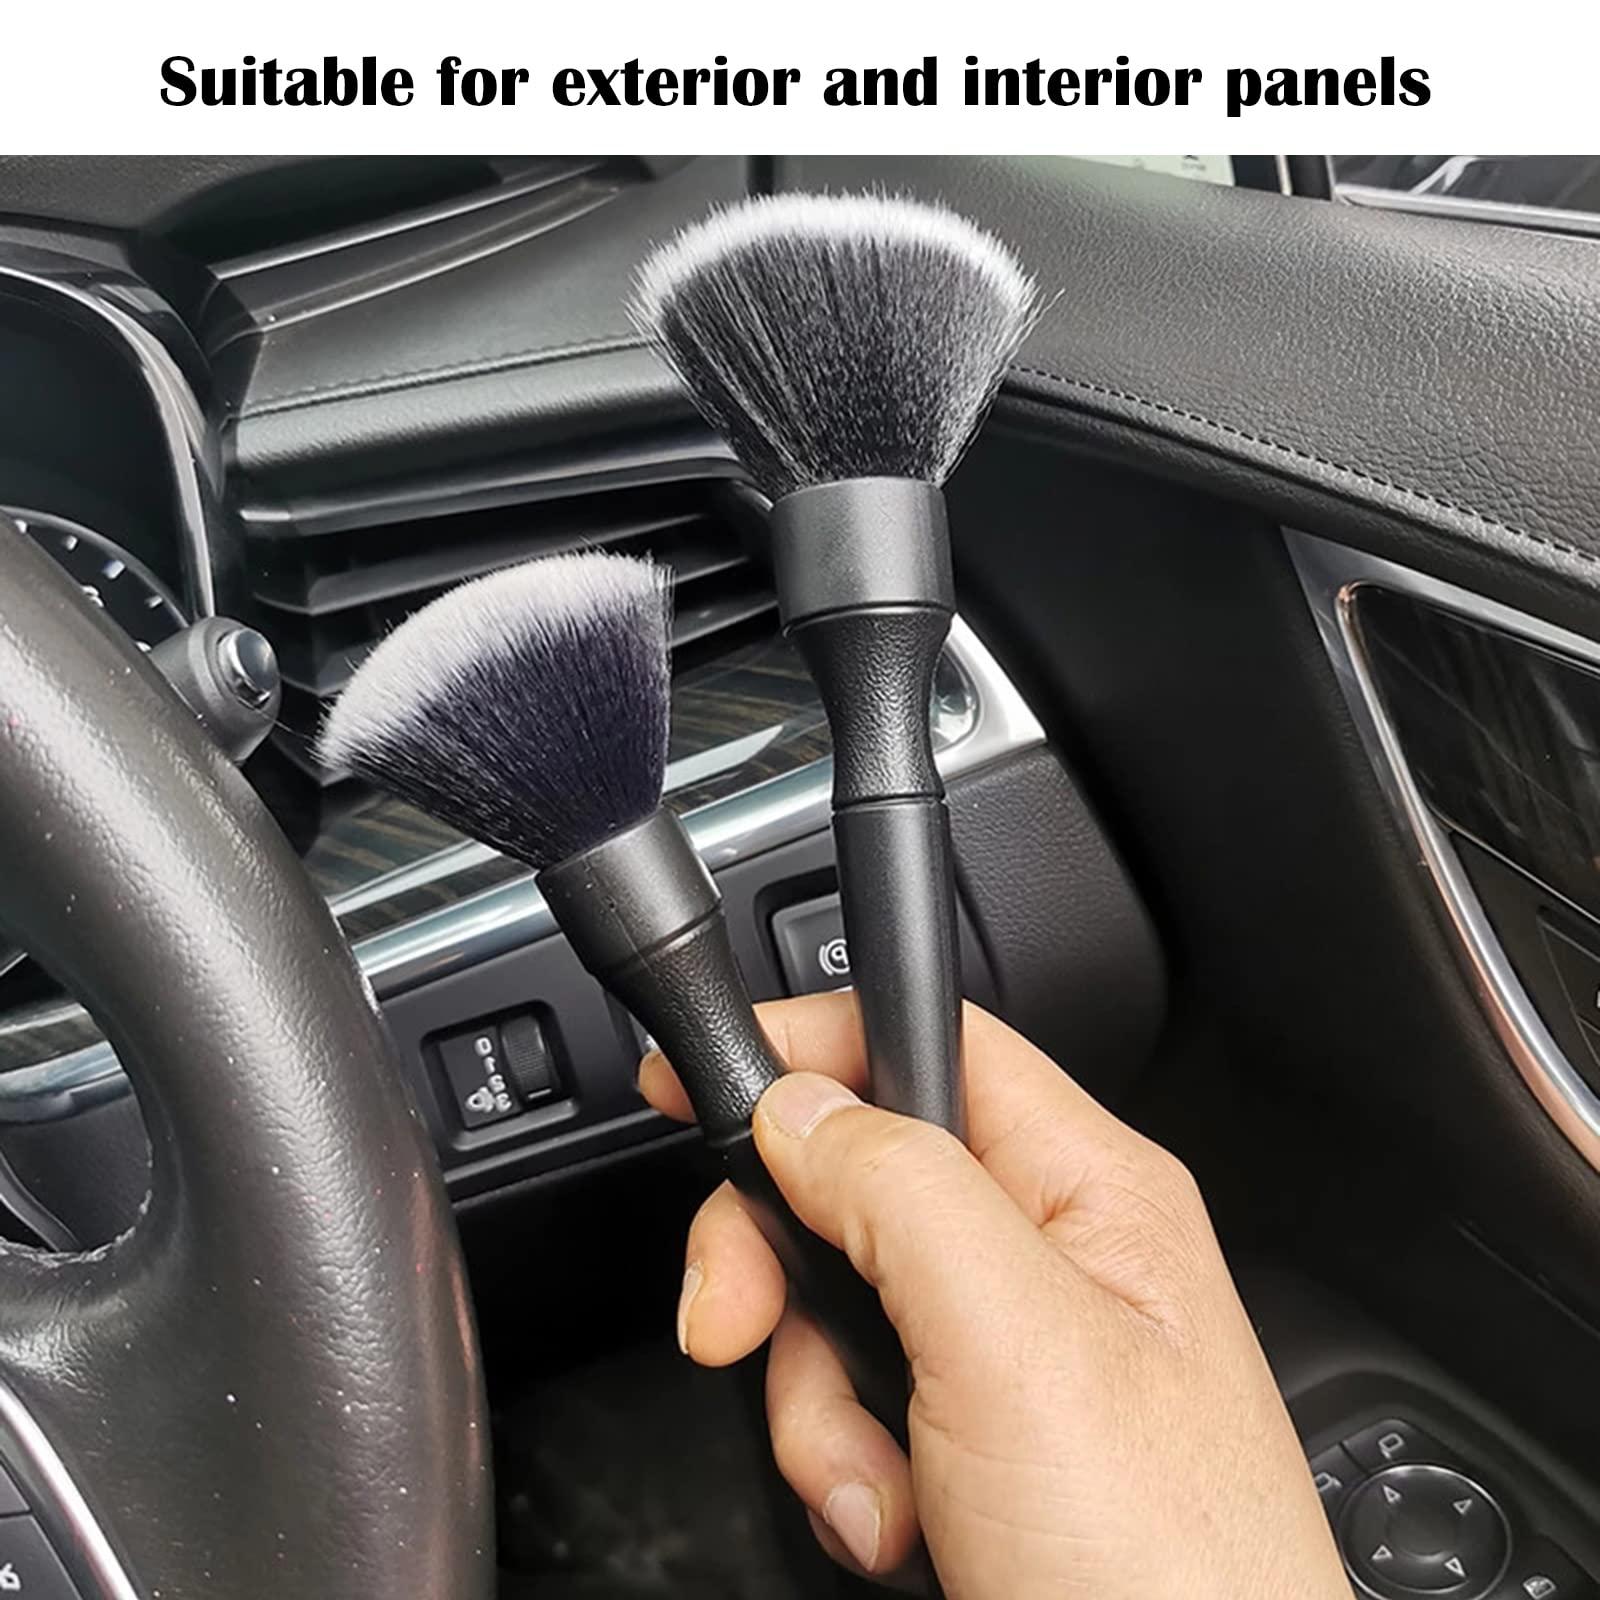 ALI2 Detailing Brush Set,Soft Comfortable Grip for Car Interior and Exterior Detailing Cleaning,Black 8